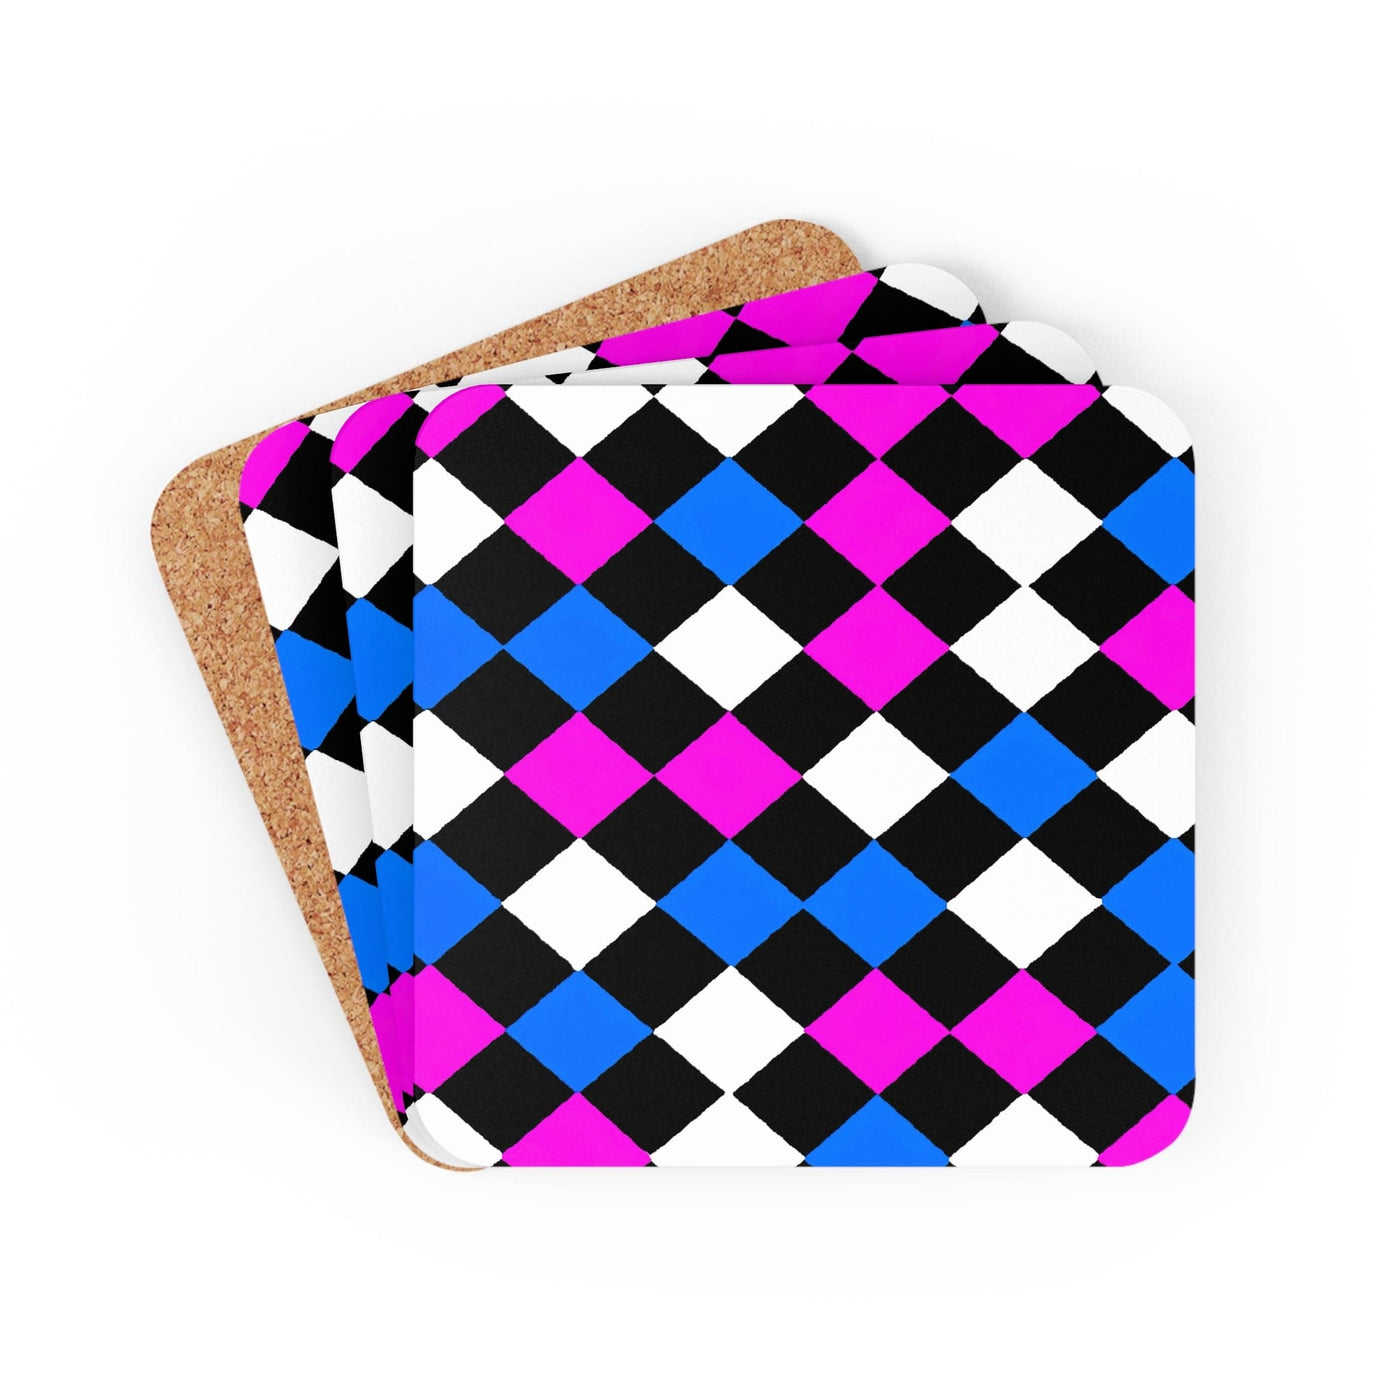 Handcrafted Square Coaster Set Of 4 For Drinks And Cups Pink Blue Checkered